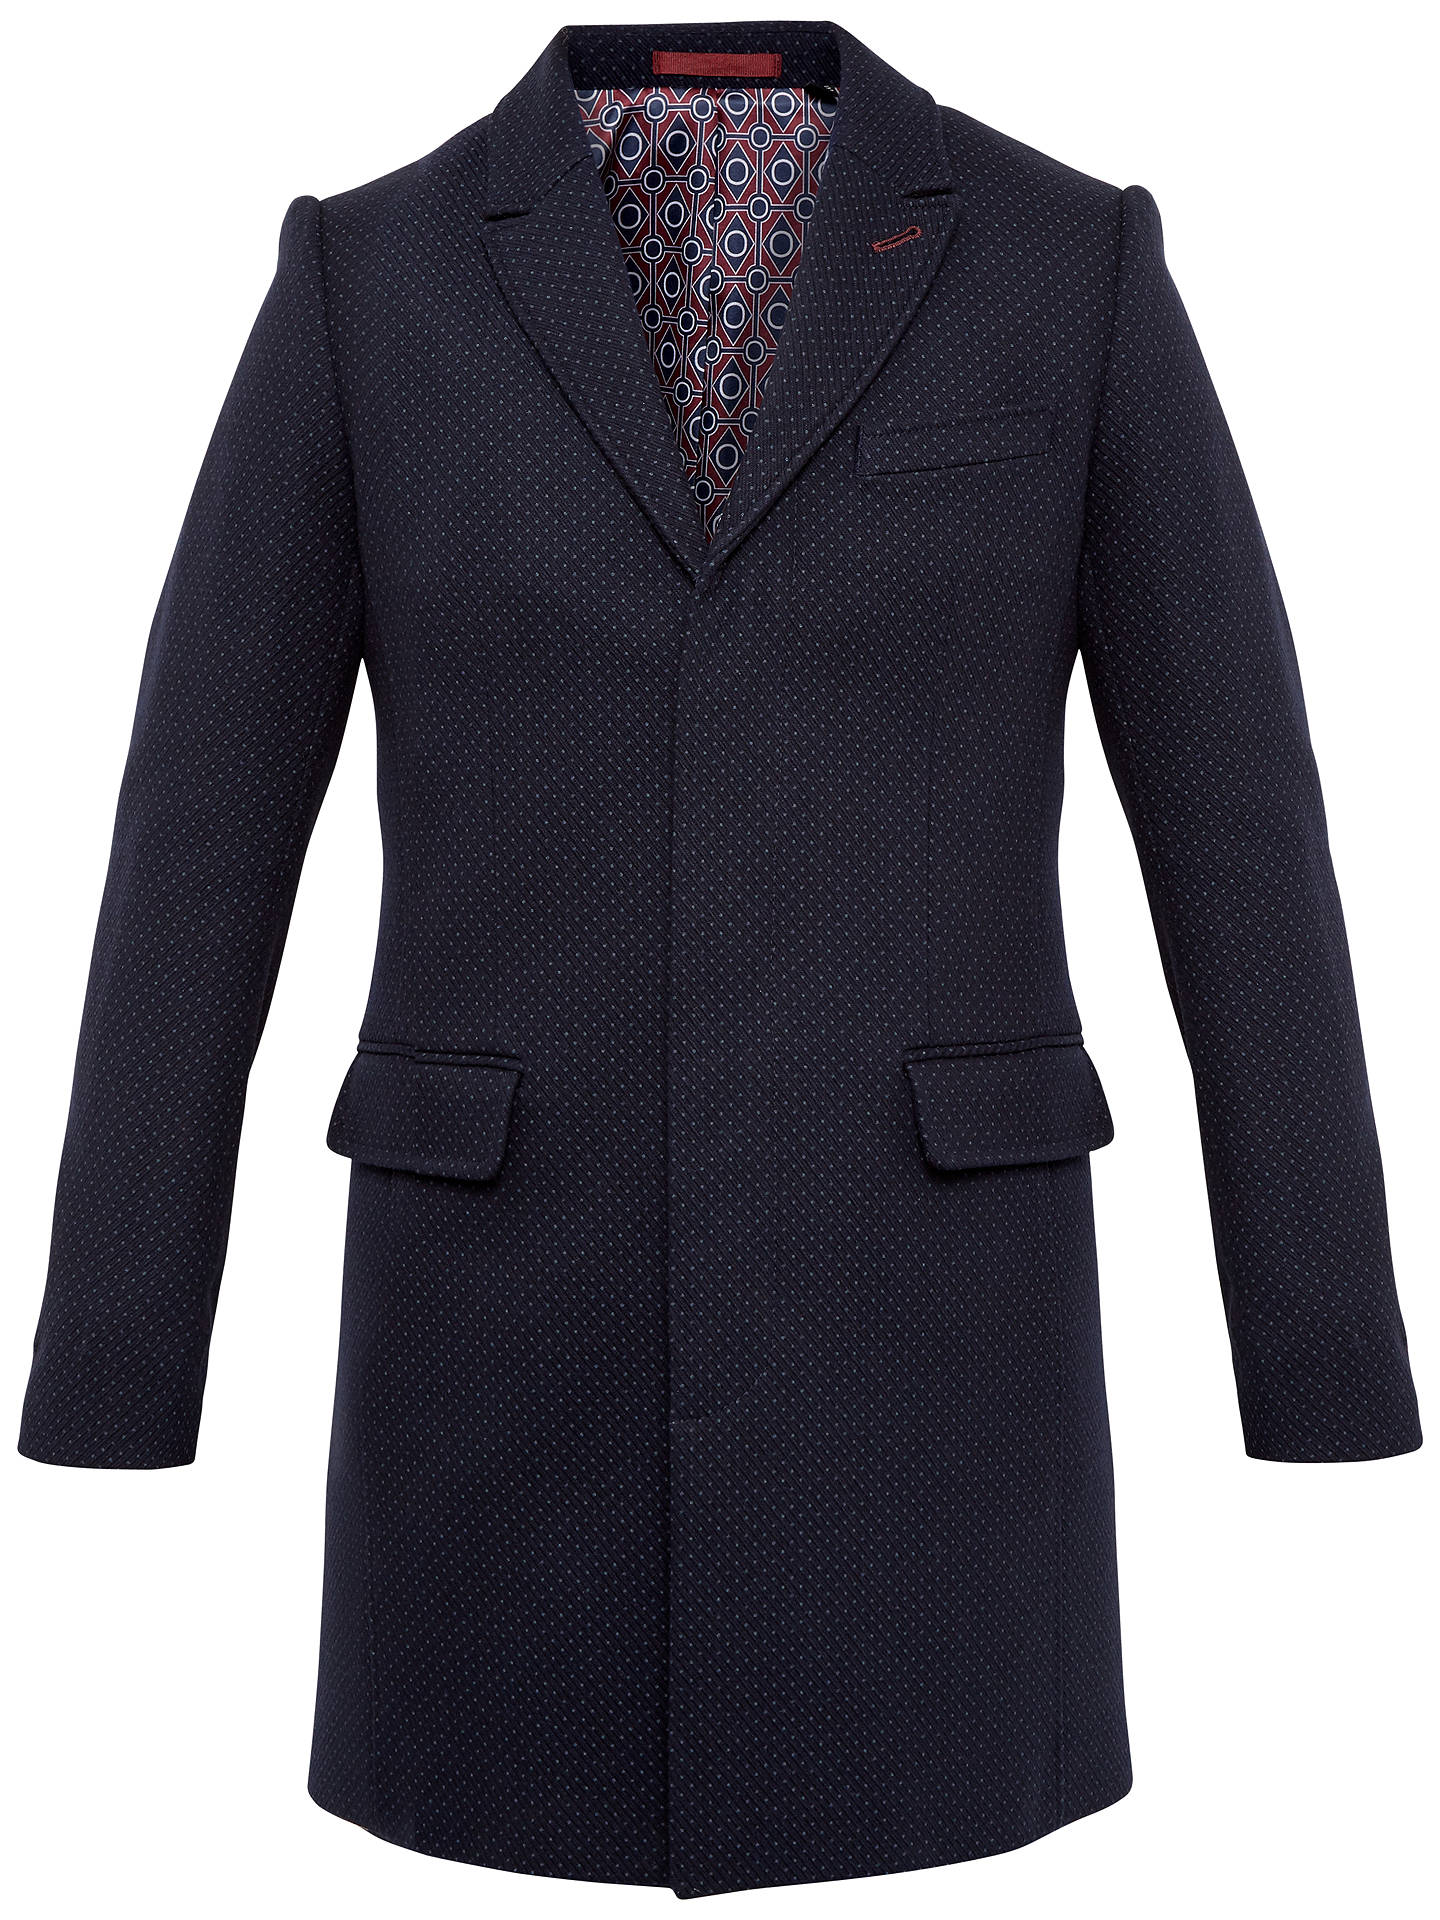 Ted Baker Rascot Spotted Twill Overcoat, Navy at John Lewis & Partners